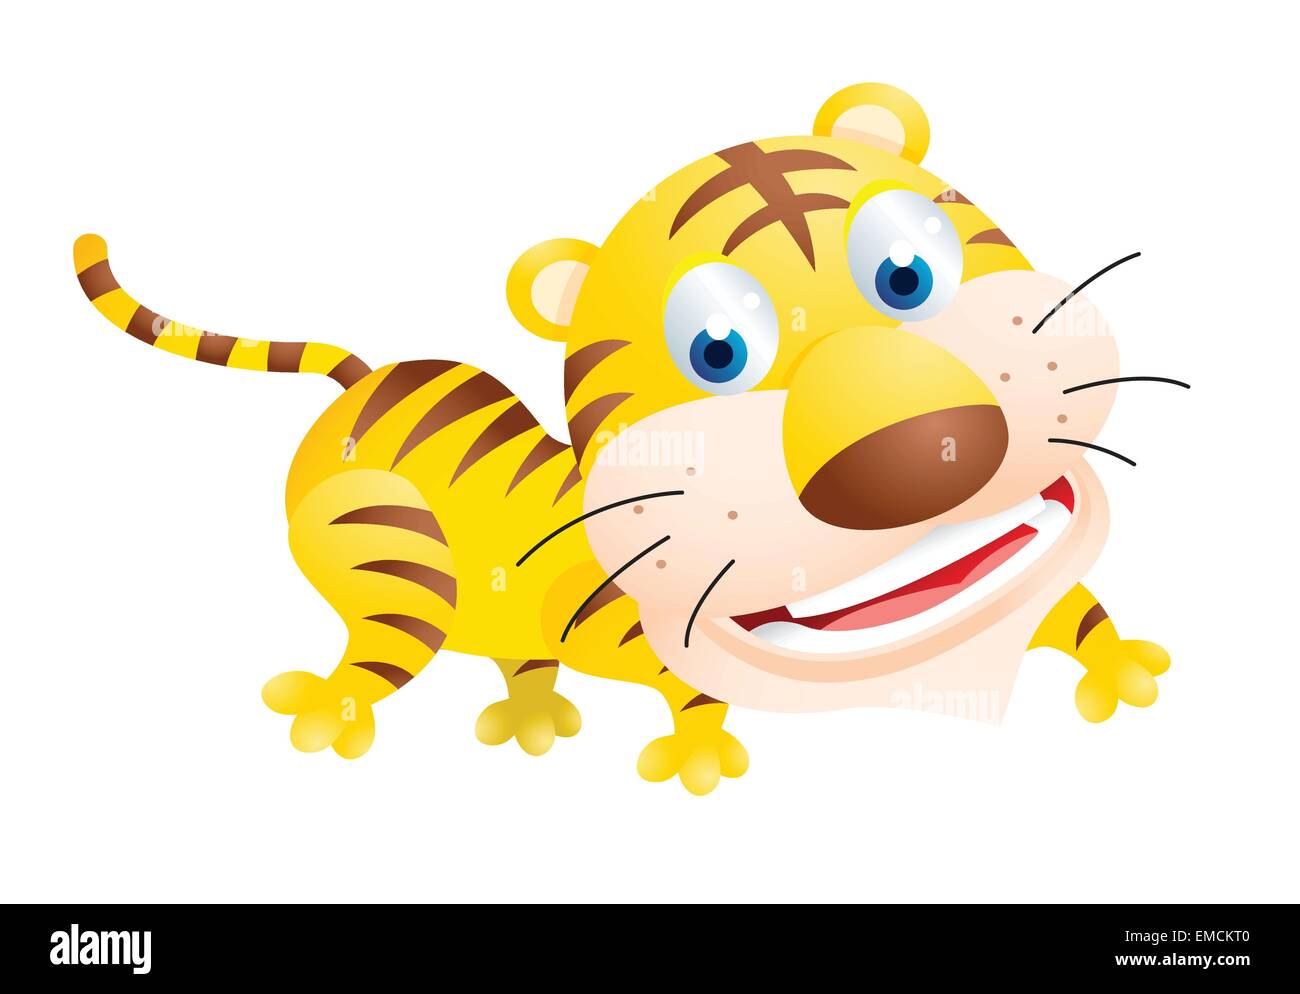 Bengal tiger sitting Stock Vector Images - Alamy